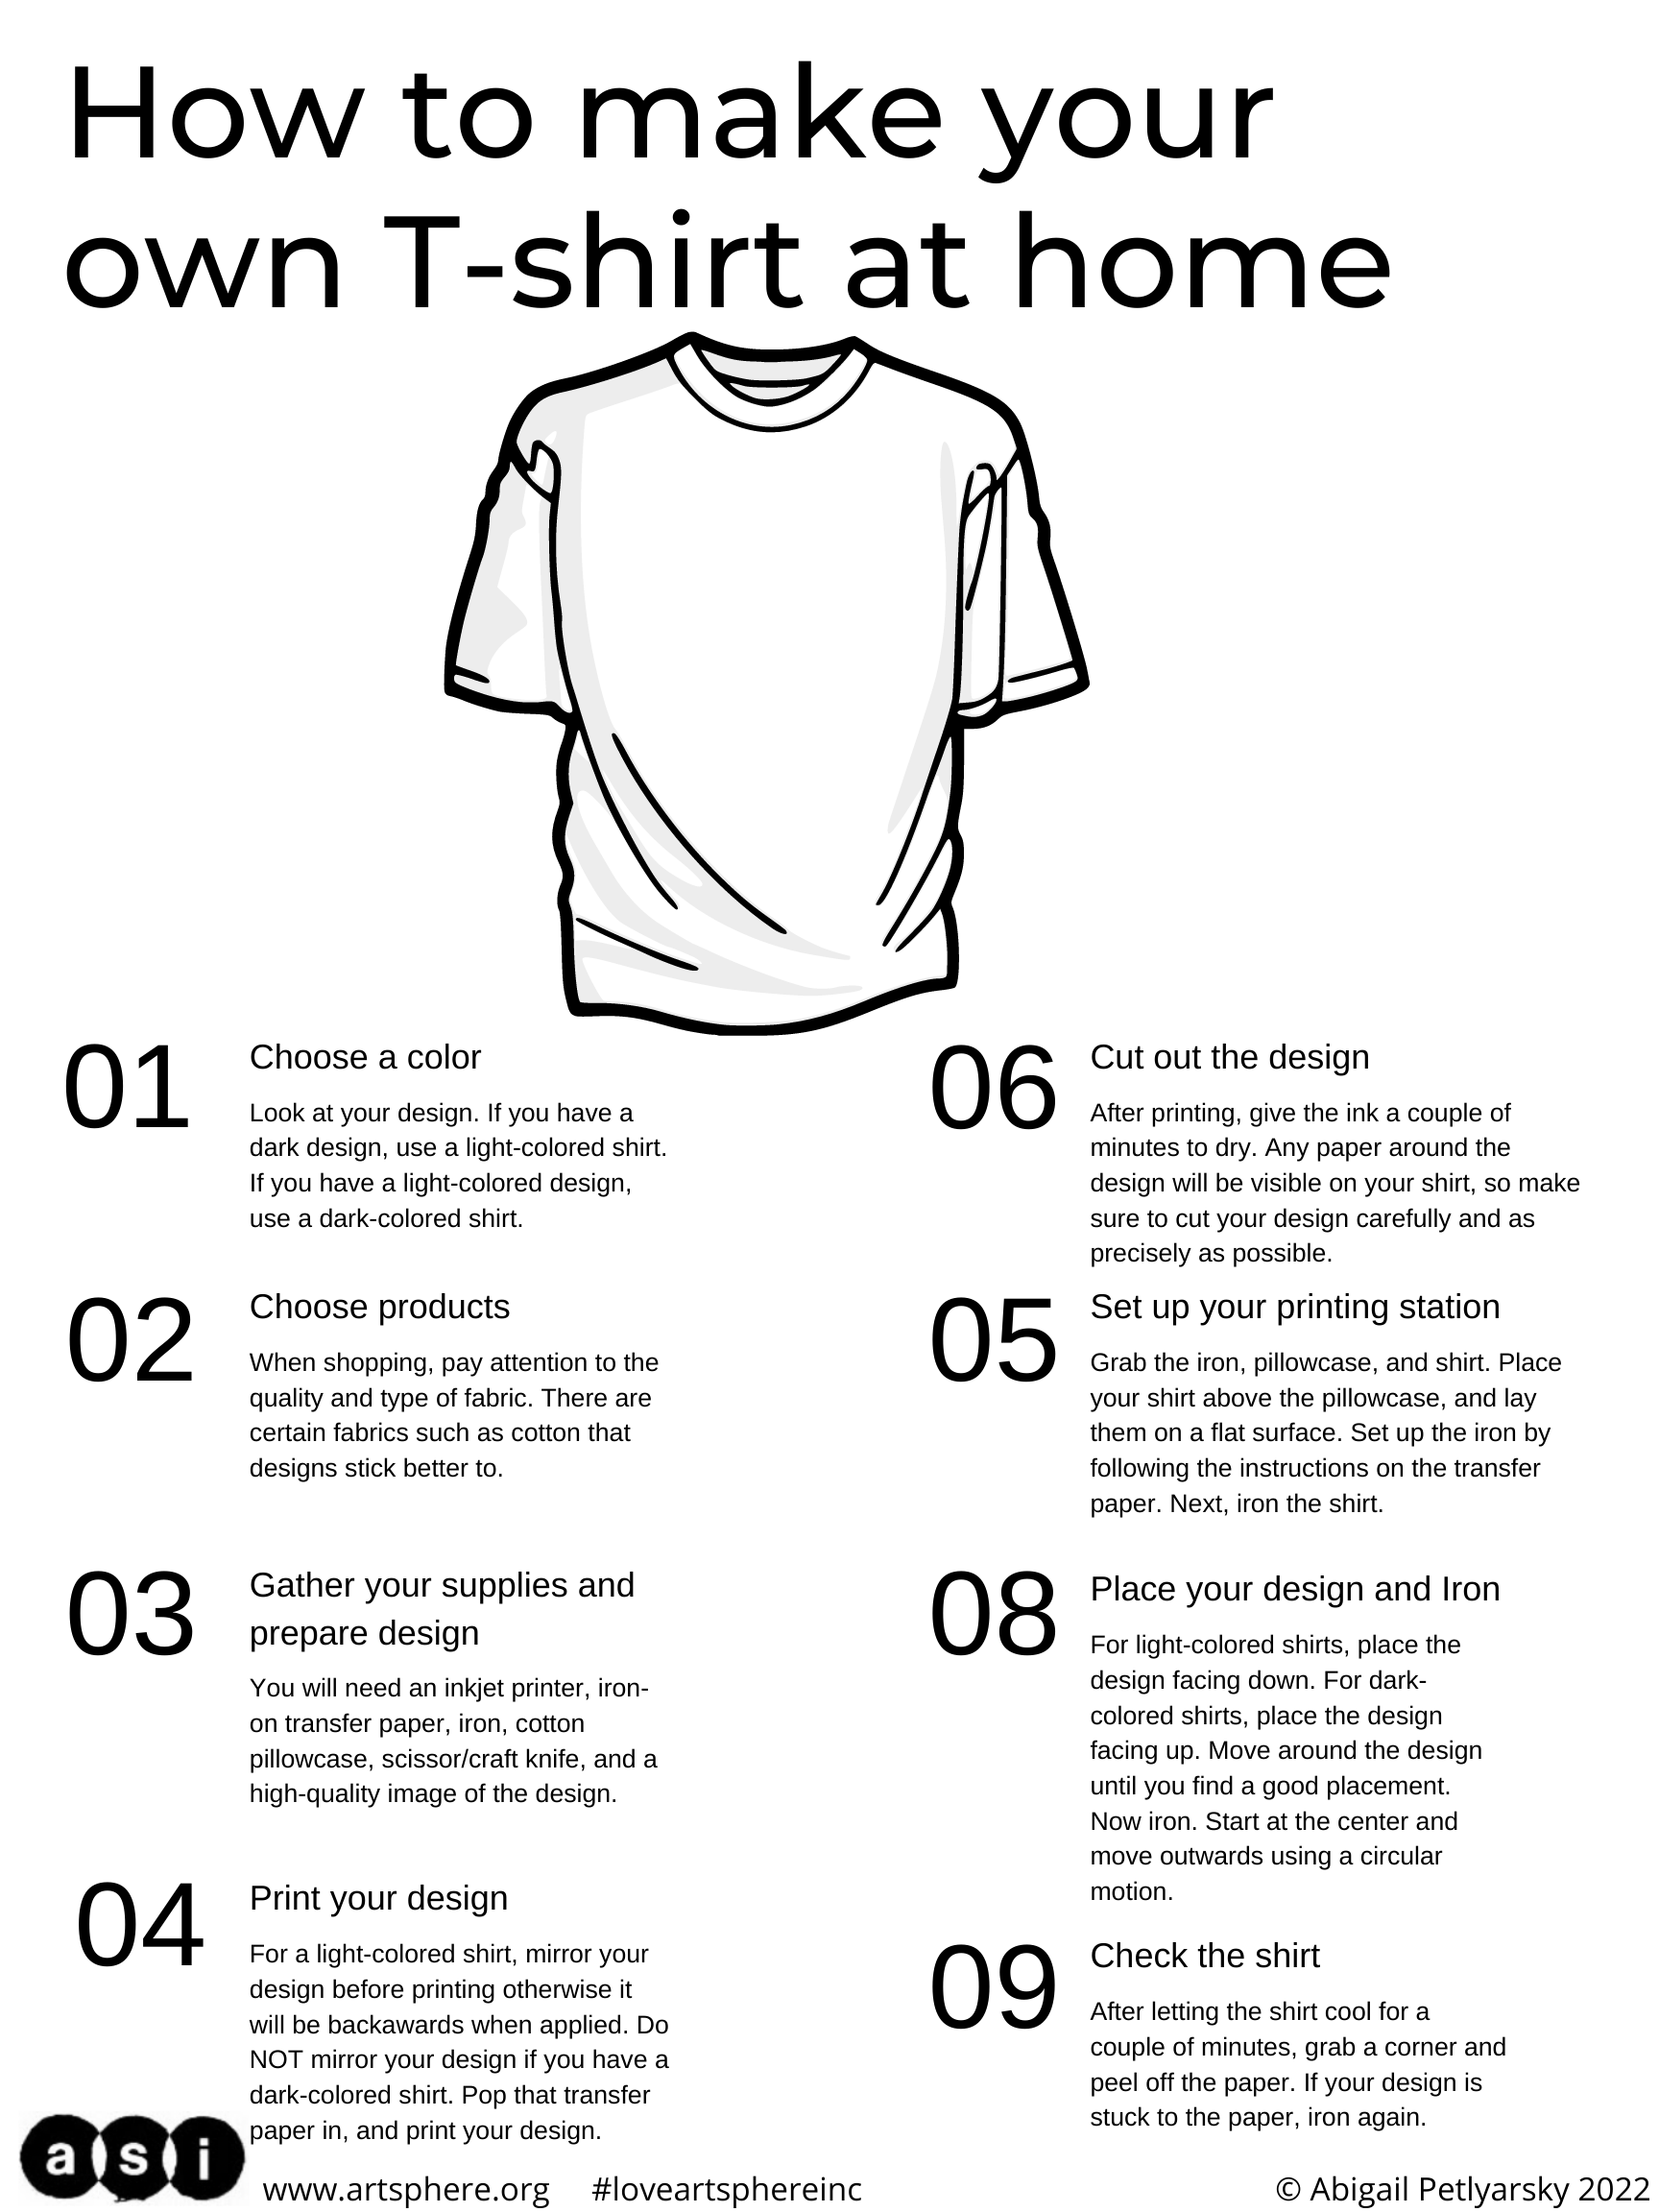 HOW TO MAKE OWN T-SHIRT HOME | Art Sphere